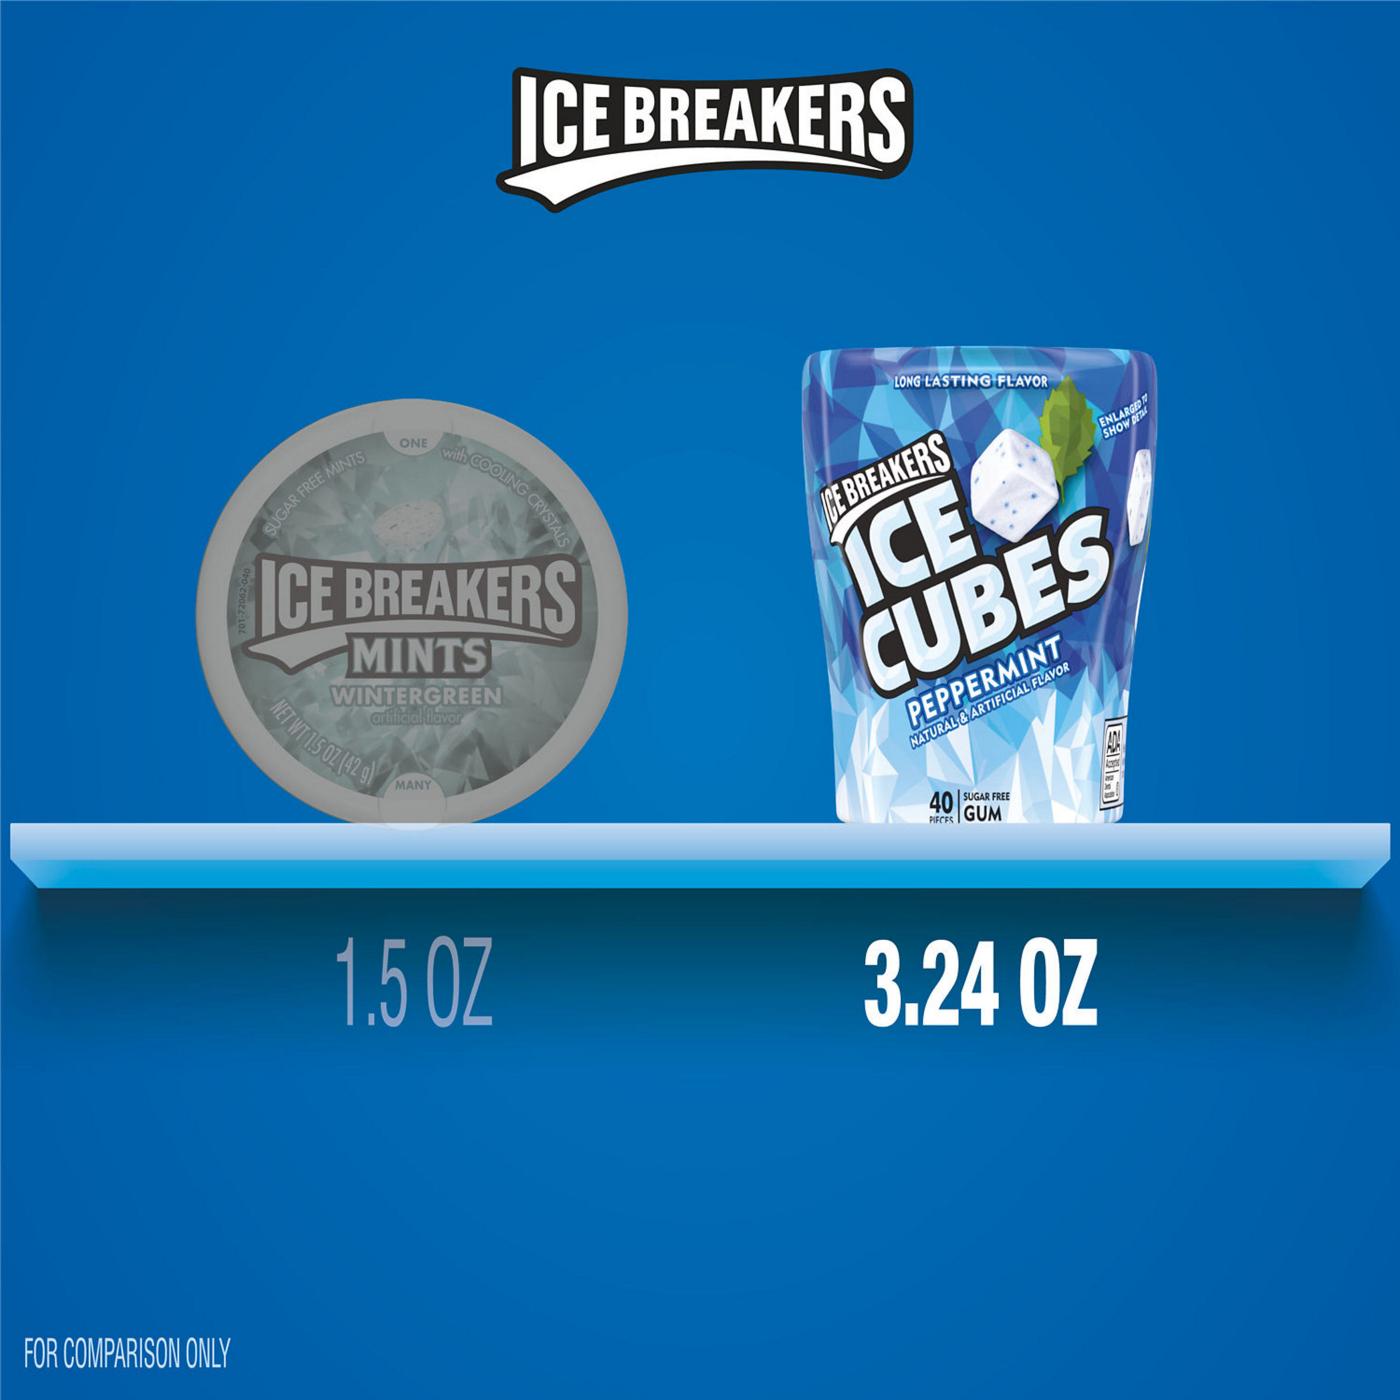 Ice Breakers Ice Cubes Peppermint Sugar Free Chewing Gum; image 4 of 7